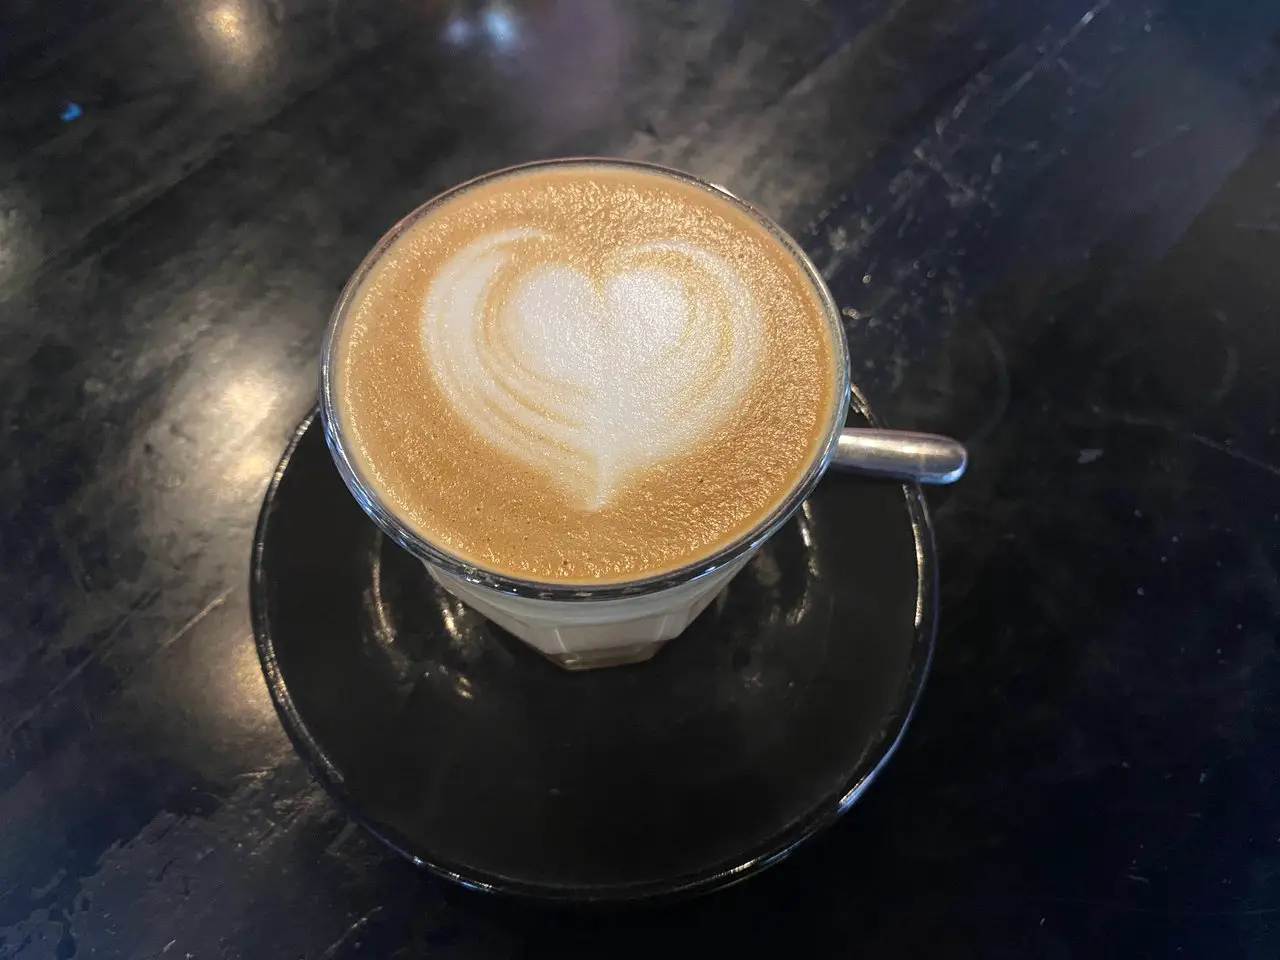 A cup of coffee with latte art showing a heart